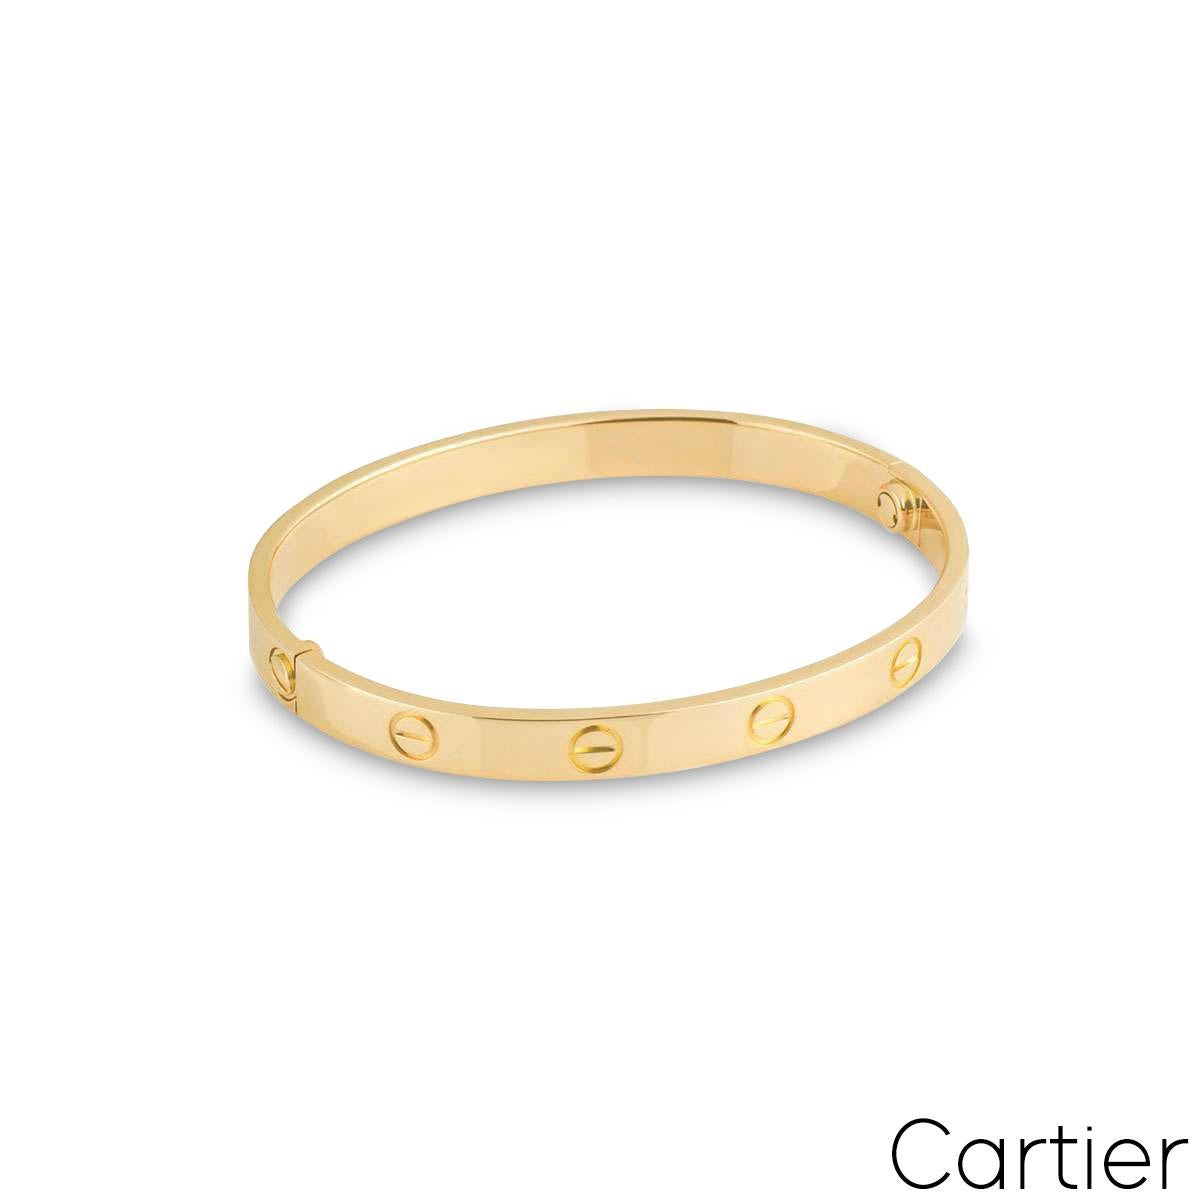 Cartier Yellow Gold Love Bracelet Size 19 B6035519 In Excellent Condition For Sale In London, GB